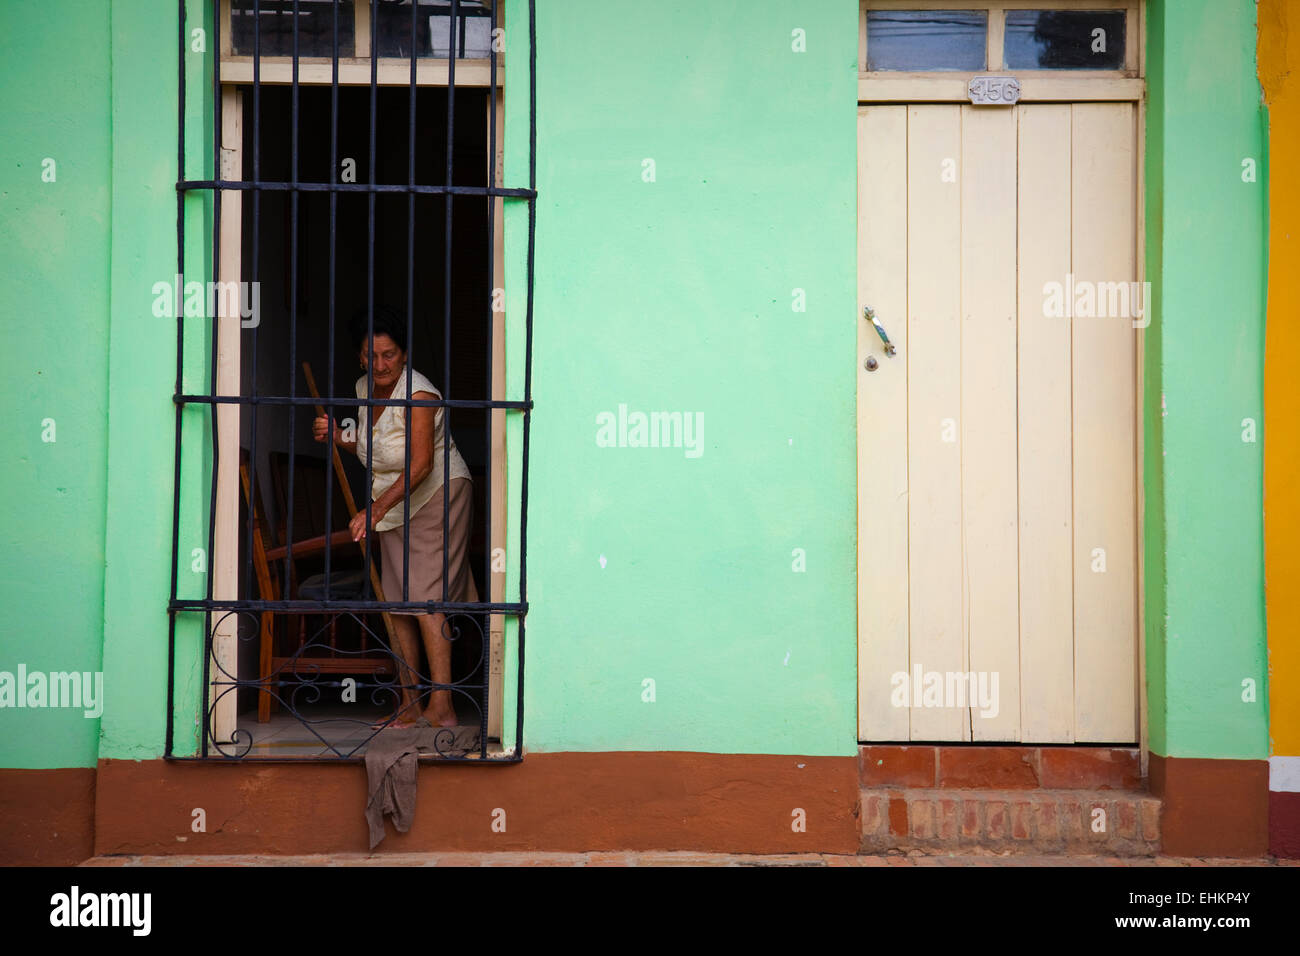 A woman sweeps her house in Trinidad, Cuba Stock Photo